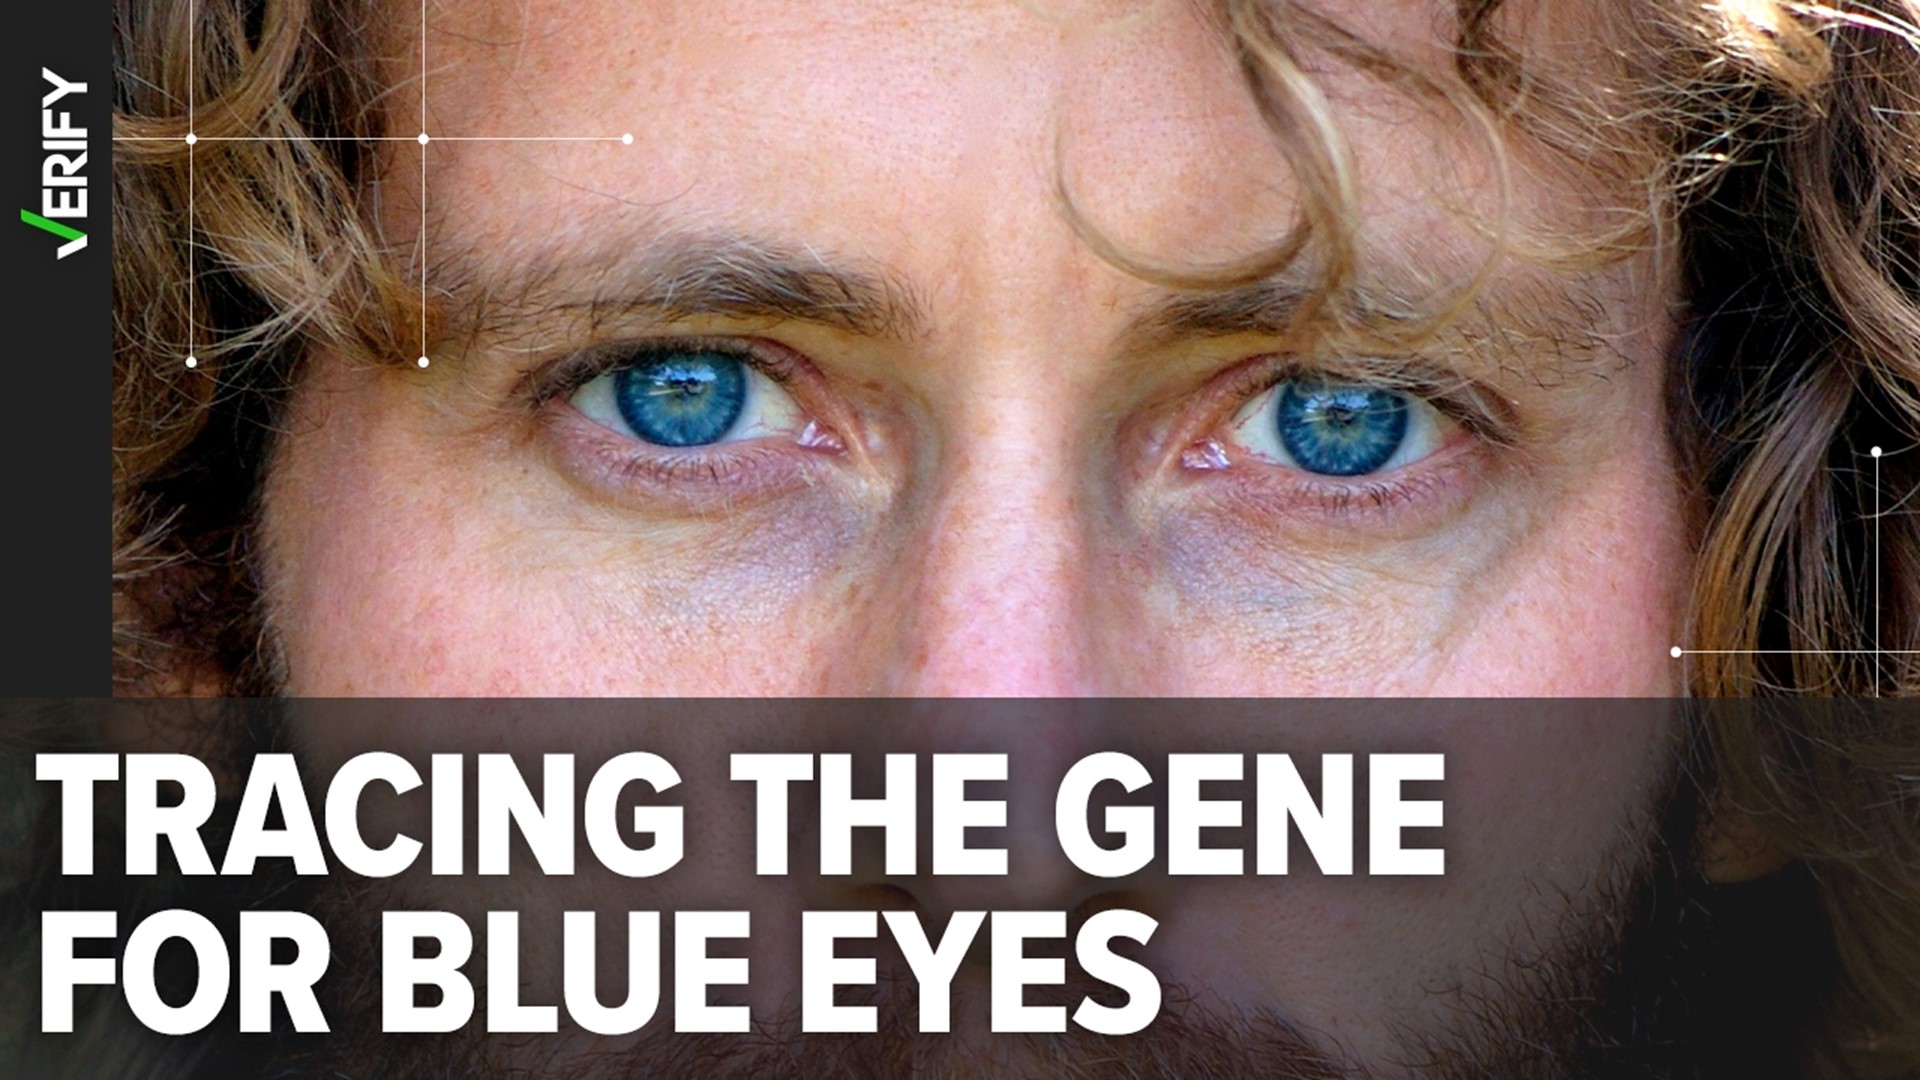 Why do some Indian people have blue eyes? Is there any ancestry